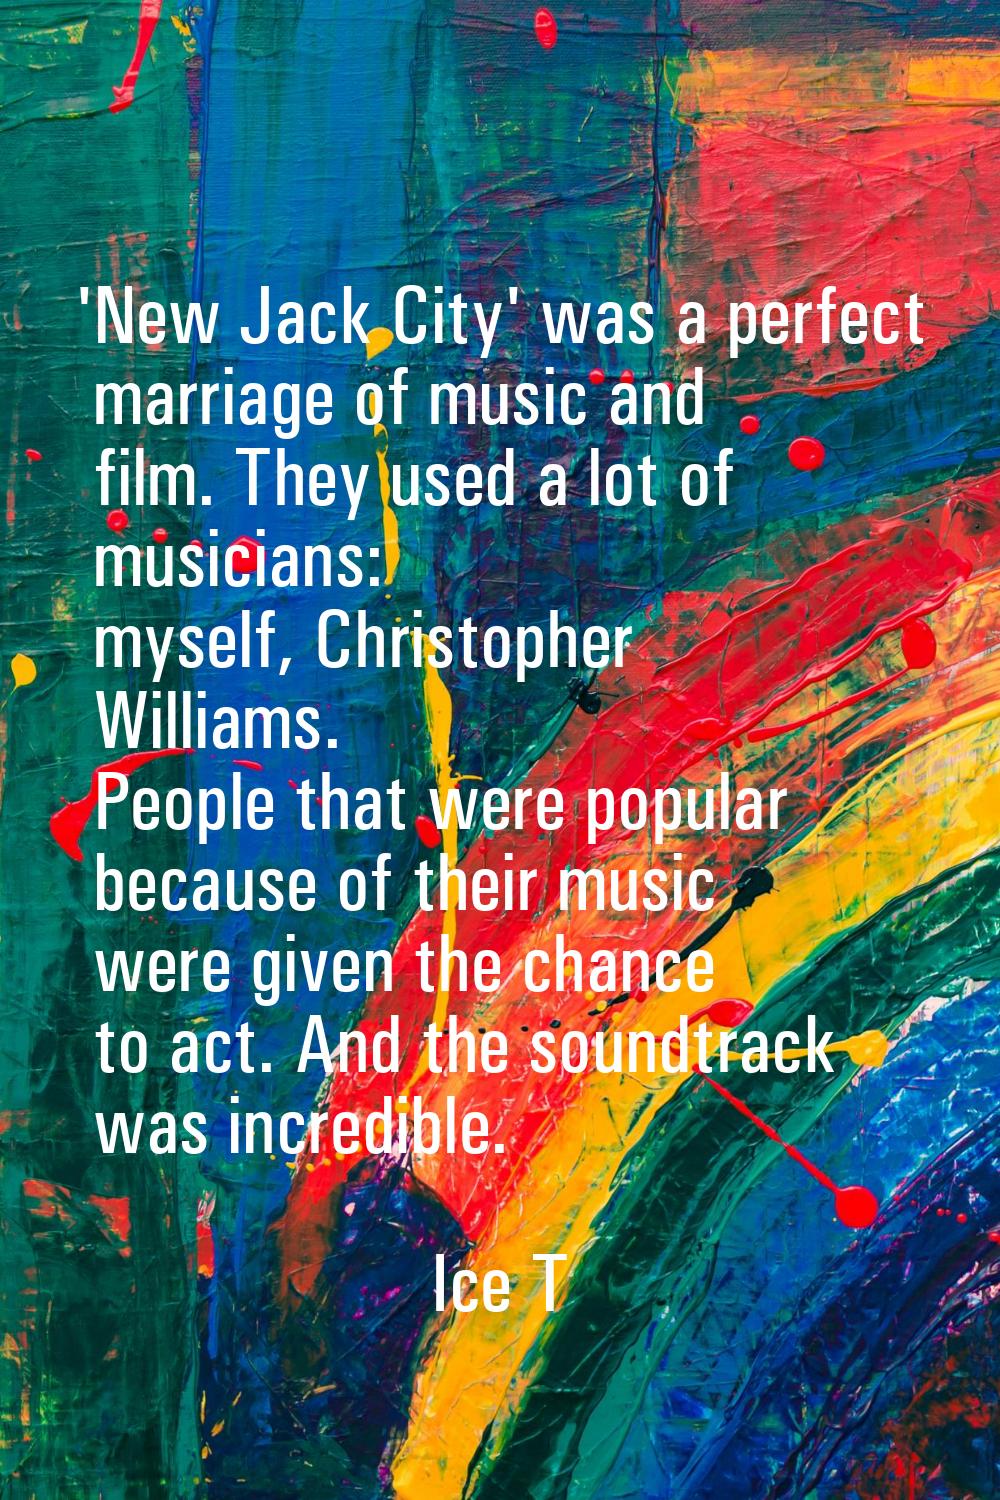 'New Jack City' was a perfect marriage of music and film. They used a lot of musicians: myself, Chr